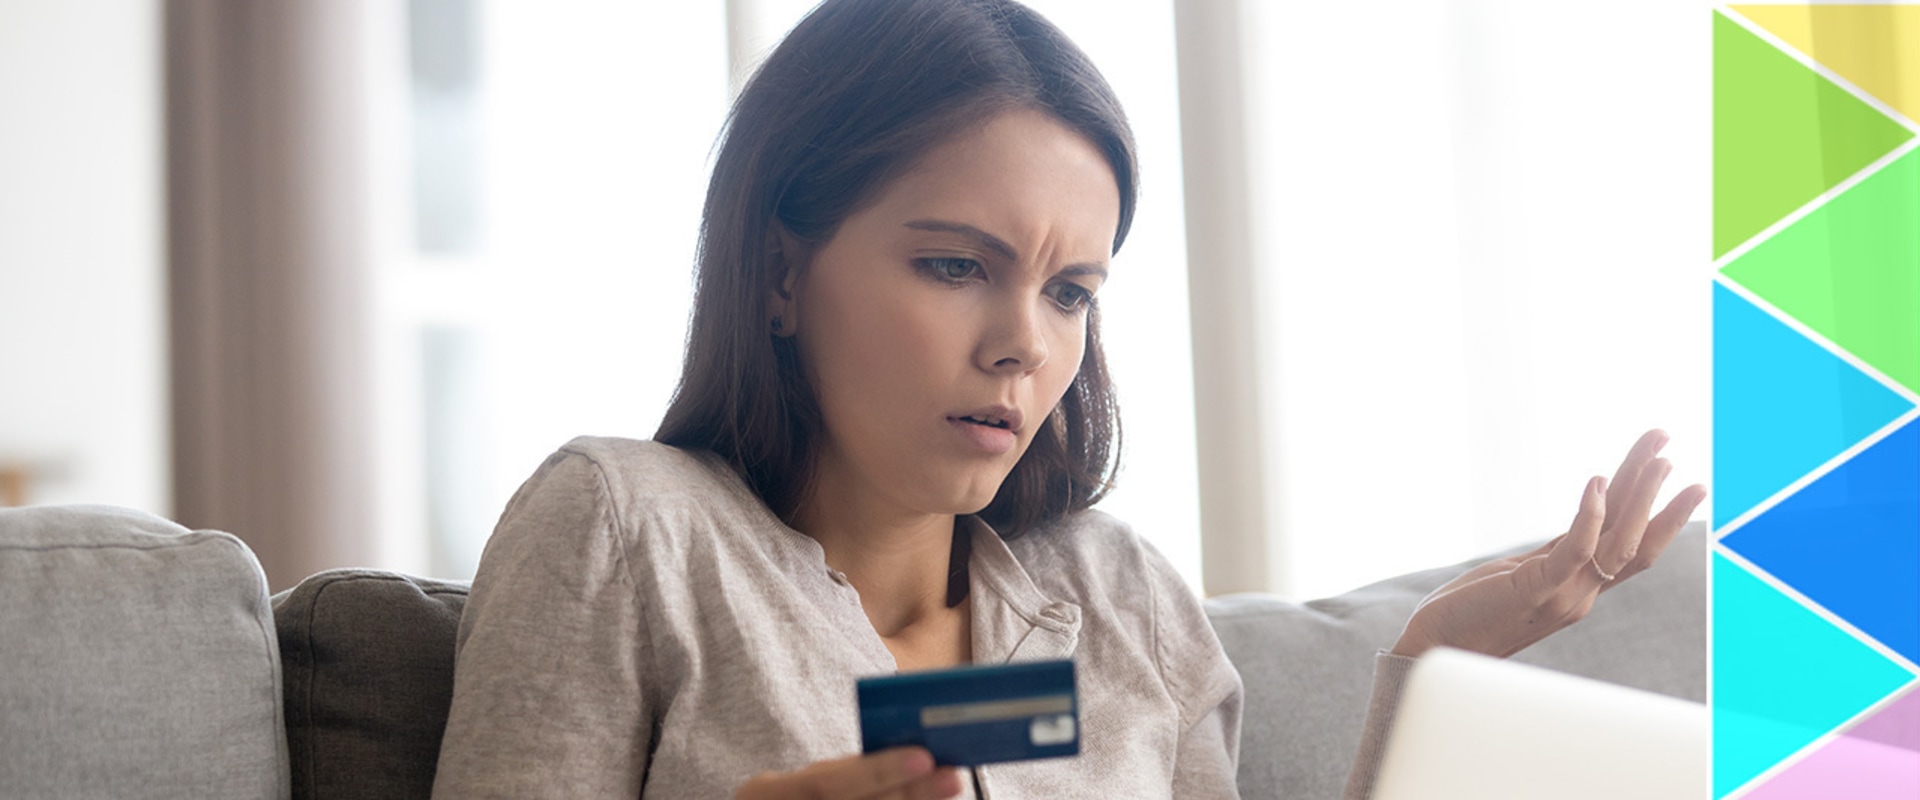 Secure Your Credit Card Payments: Tips for Online Shopping Safety